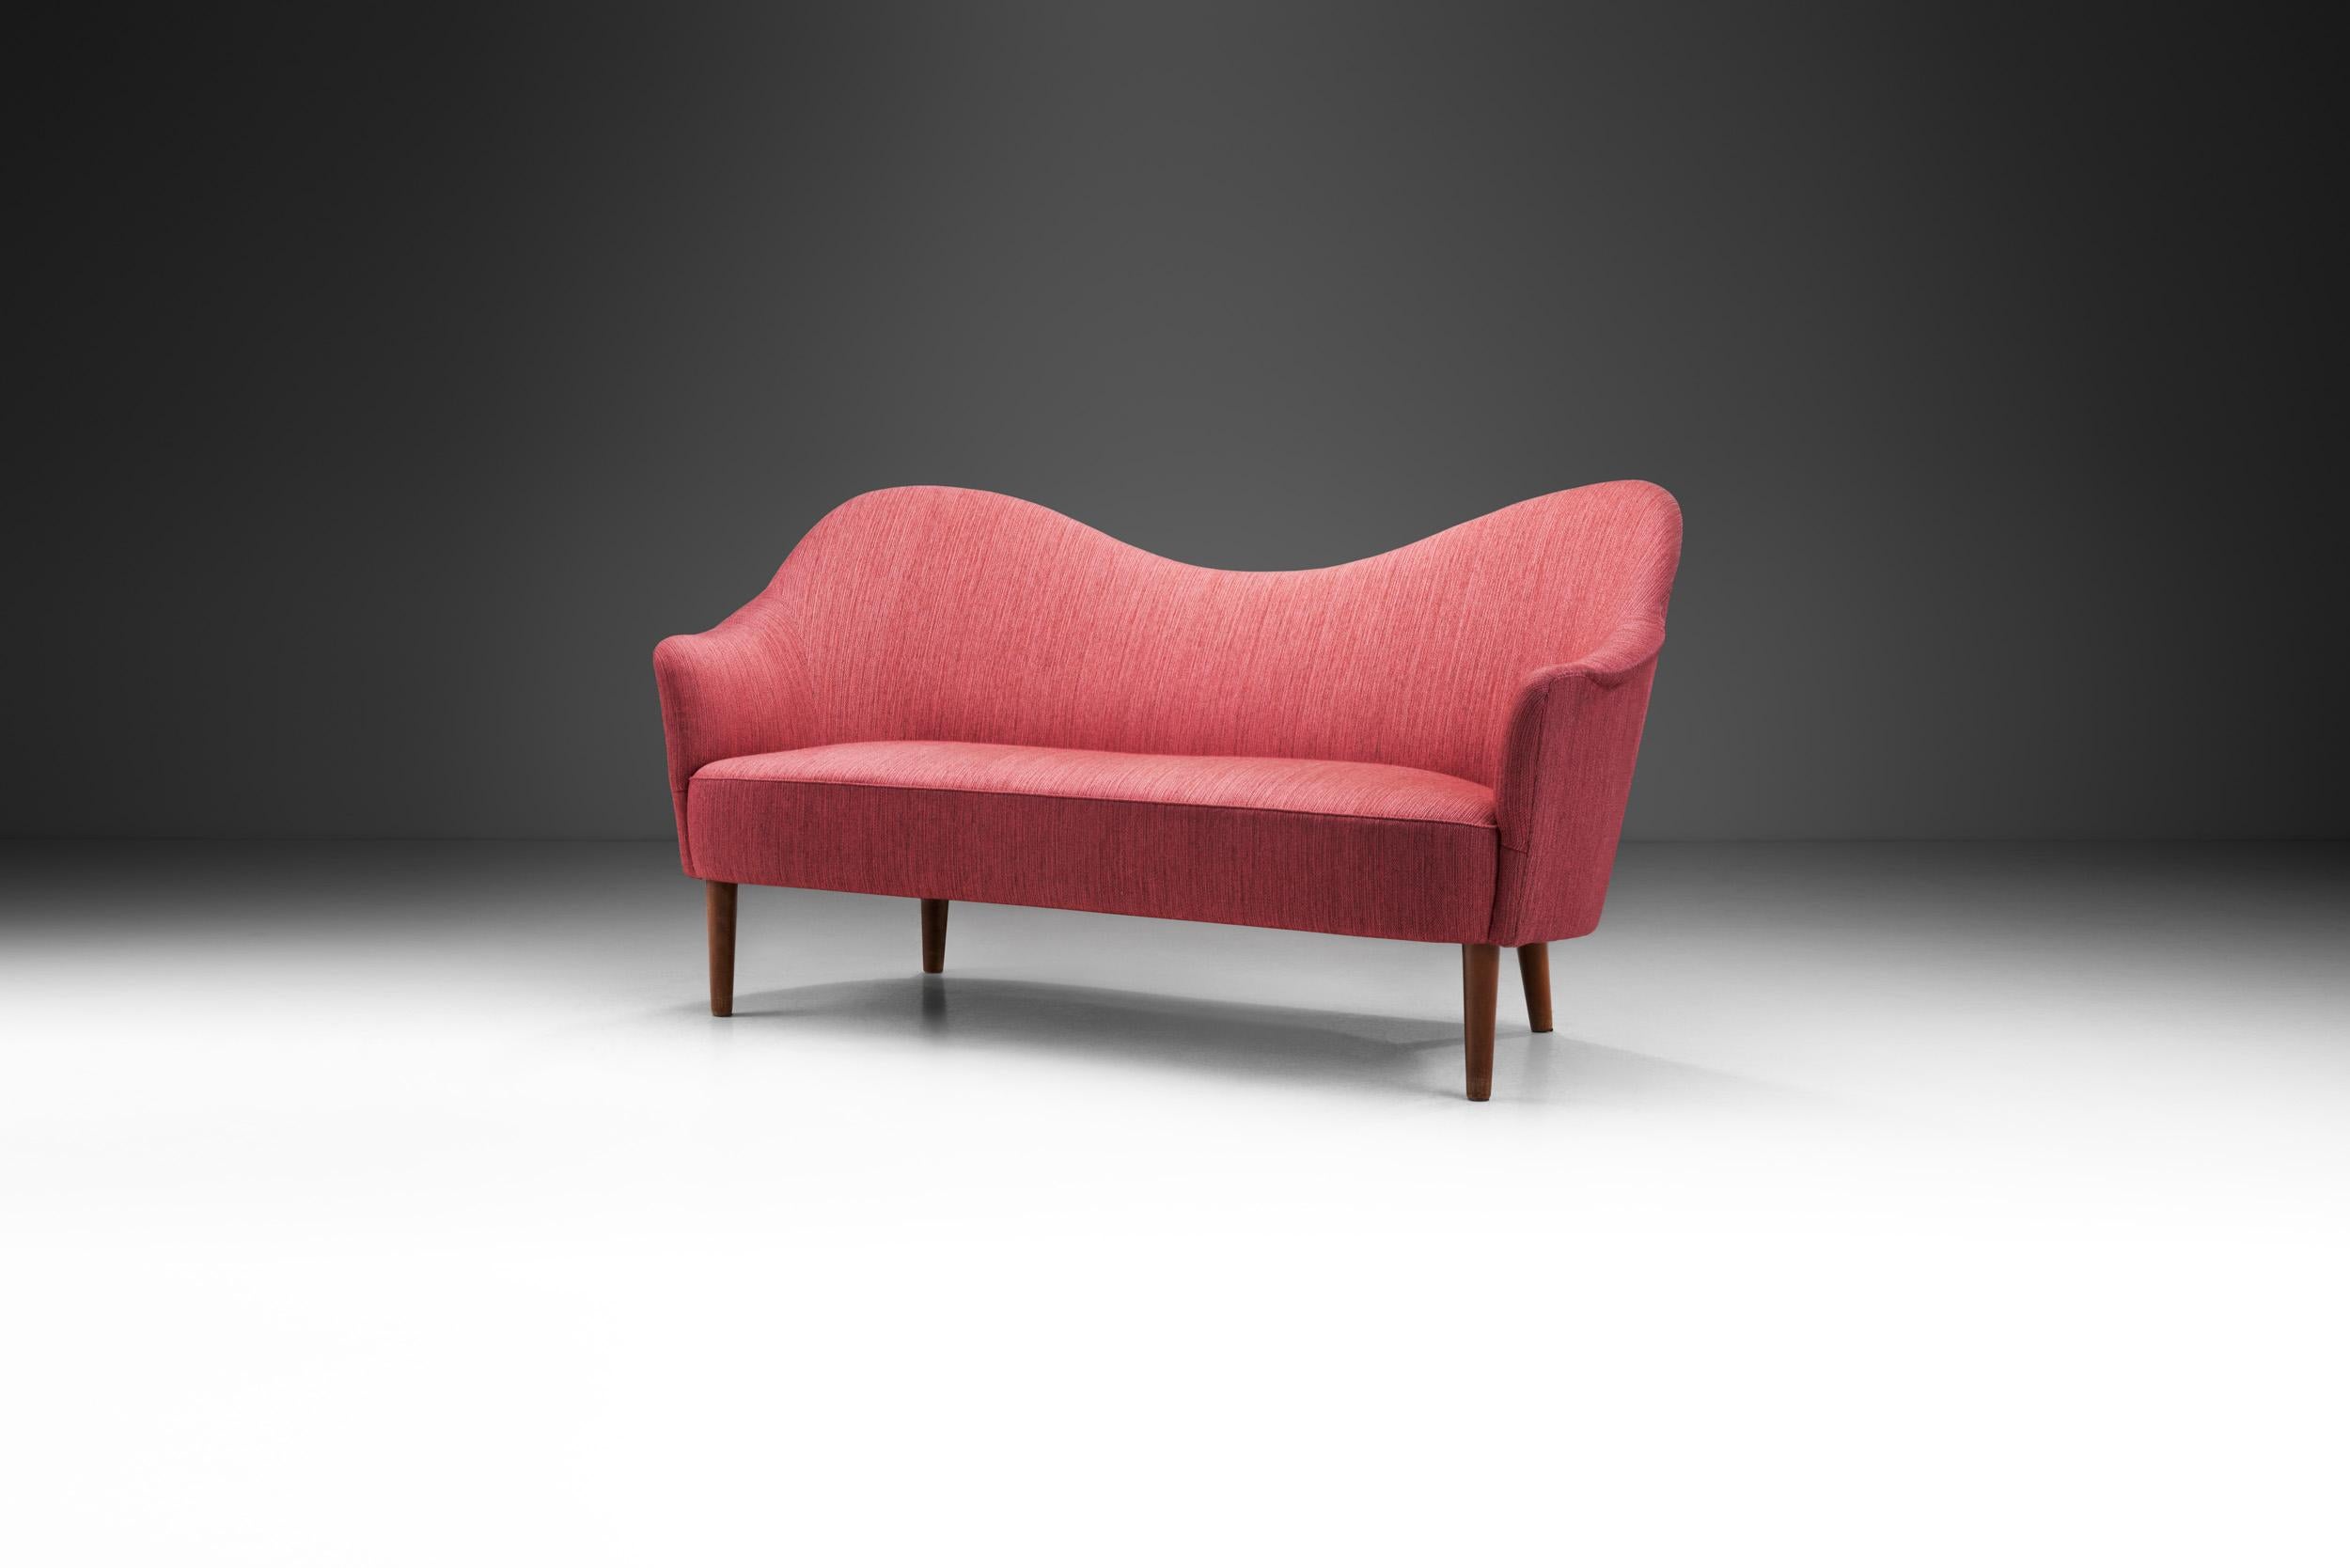 The “Samspel”, or “Interaction” sofa model was first introduced at the exhibition at Röhsska Museet (the Swedish Museum of Design and Crafts) in Gothenburg in 1956. The model’s name means ‘interaction’ in Swedish, which refers to not only Carl